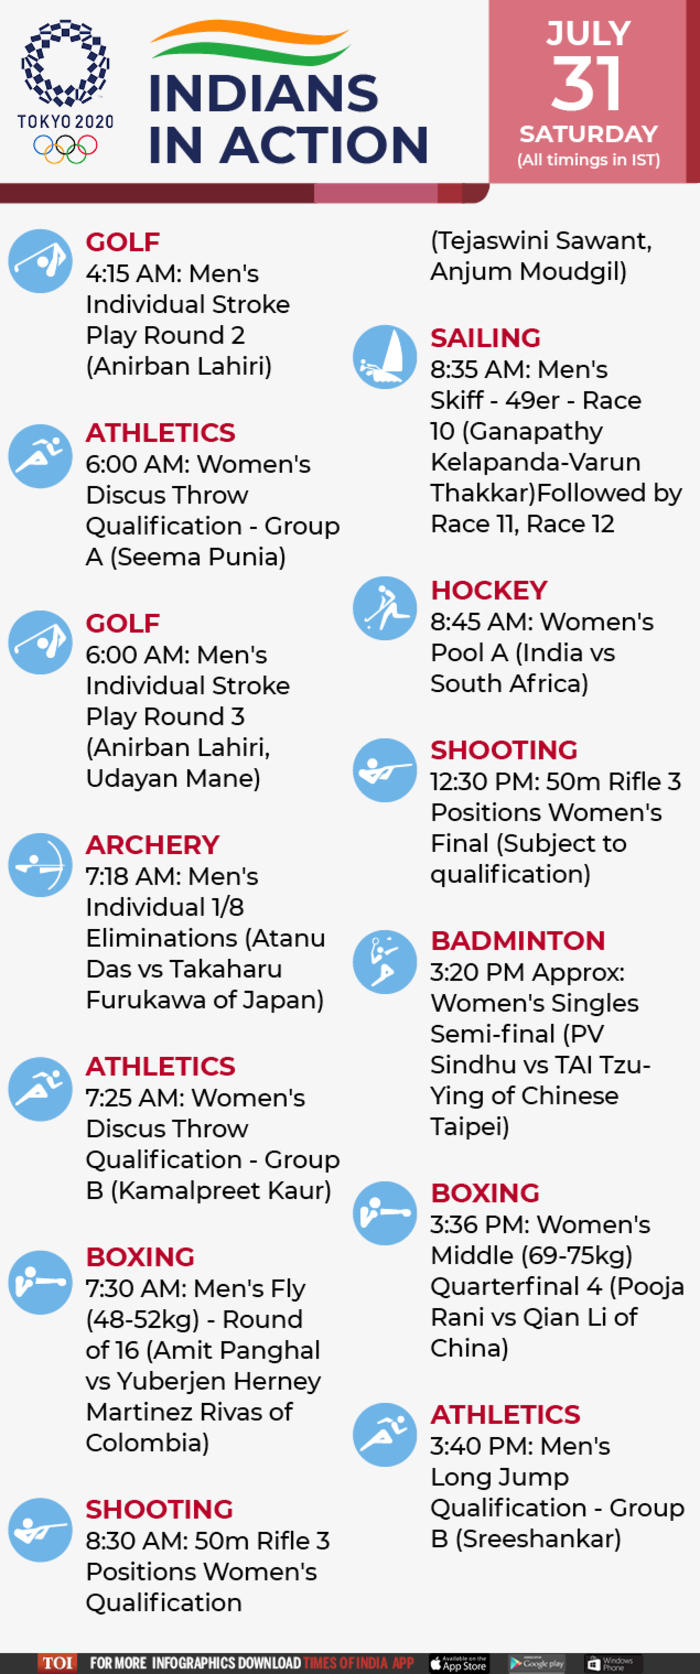 Olympic games tokyo 2020 schedule and results